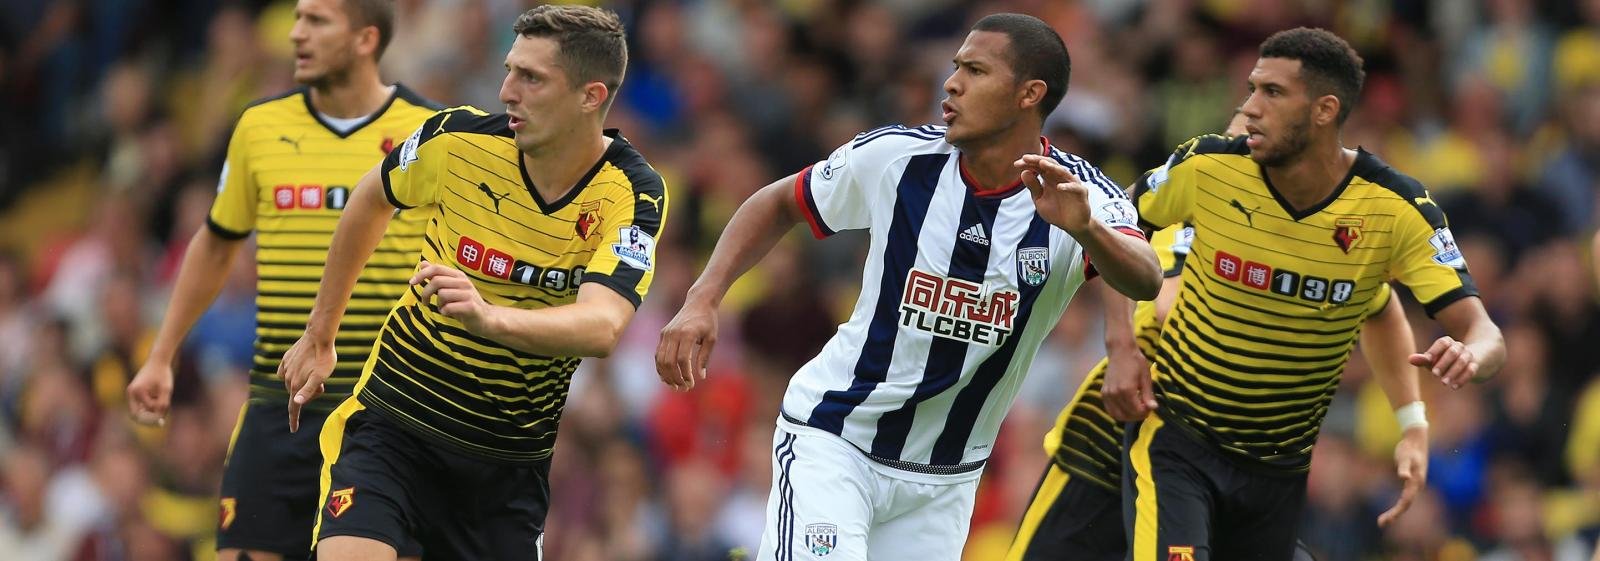 West Brom vs Watford: Preview & Prediction